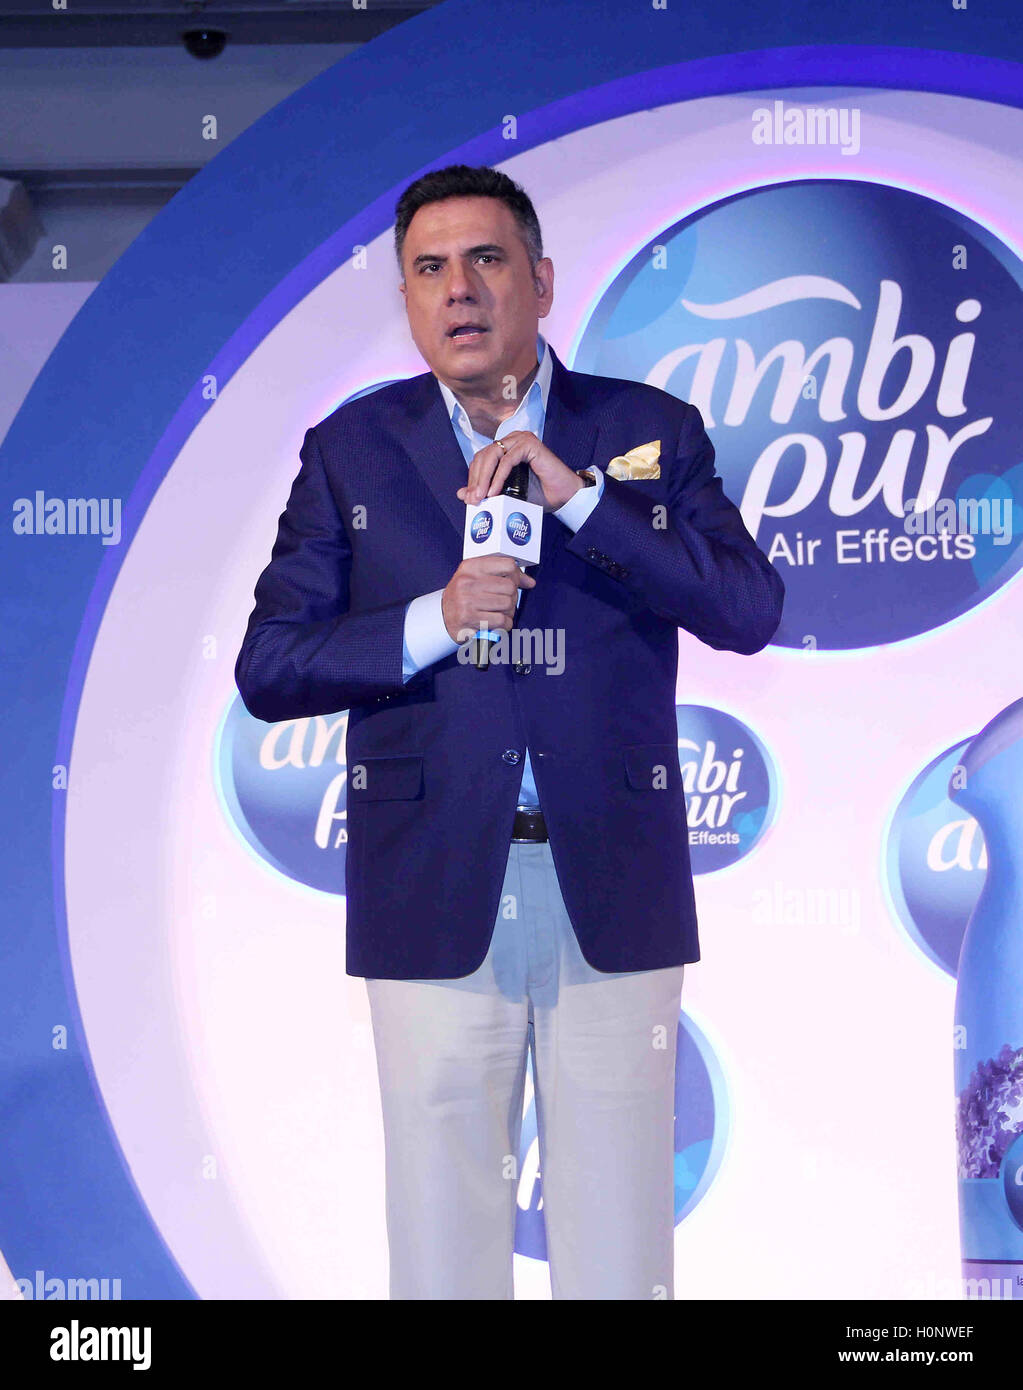 Bollywood actor Boman Irani during a promotional event by Ambi Pur, in Mumbai, India on September 13, 2016. Stock Photo